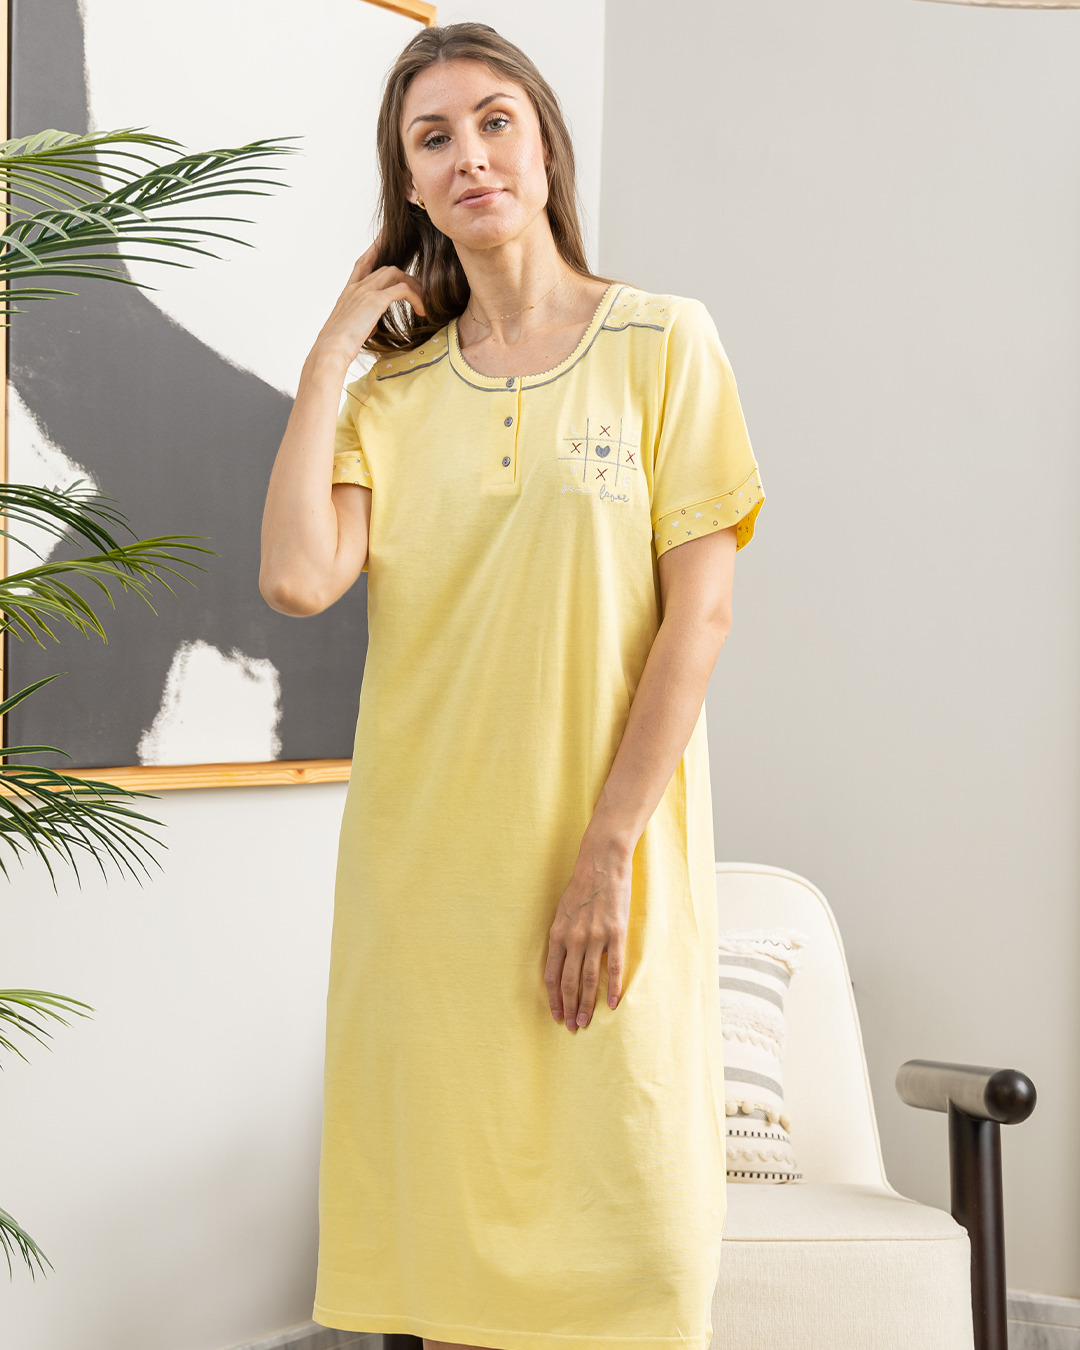 Game love women's button-down nightgown